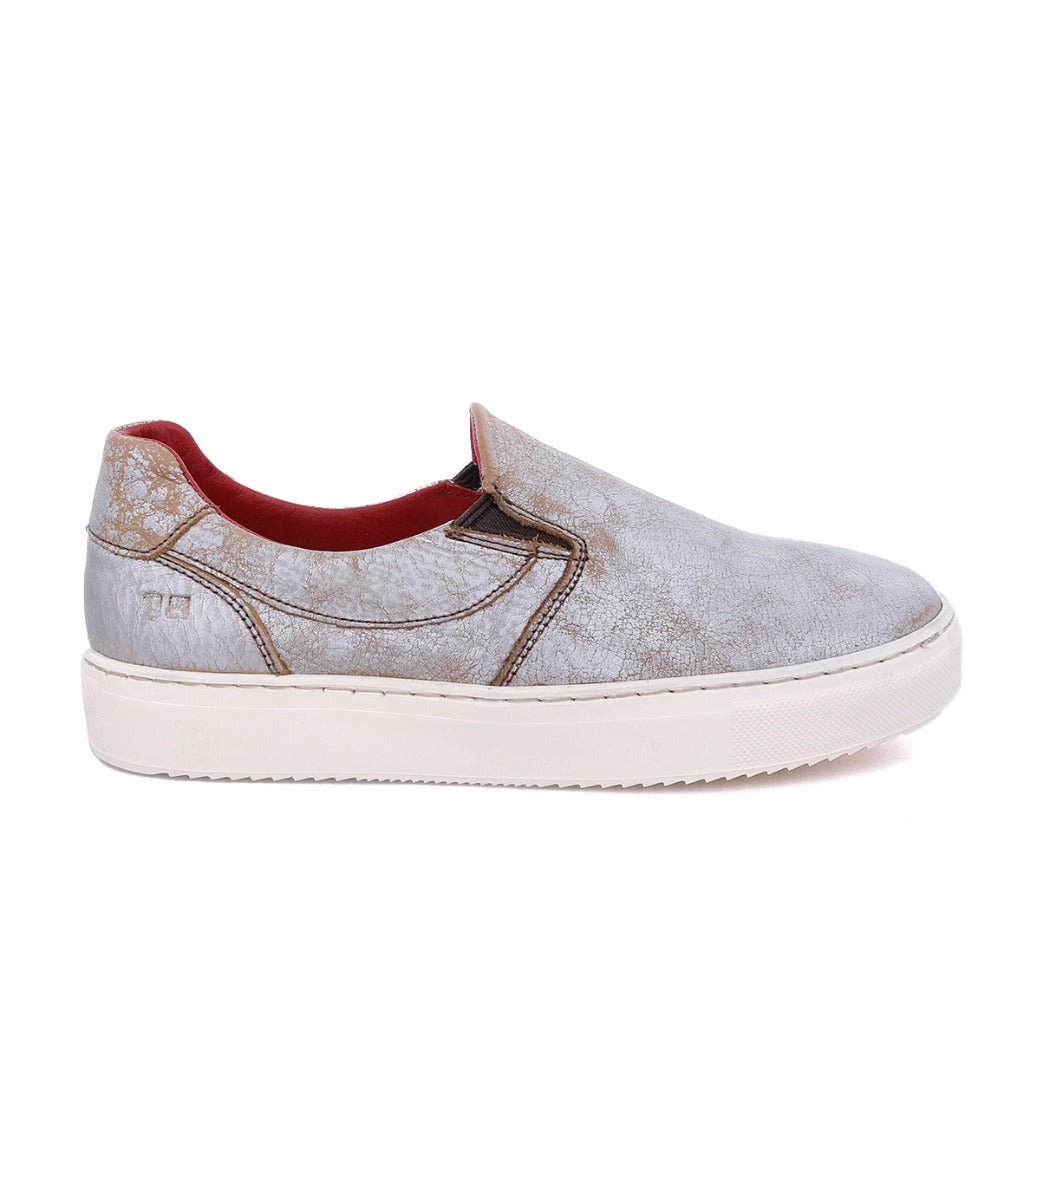 A grey slip on sneaker with a red sole named Hermione by Bed Stu.